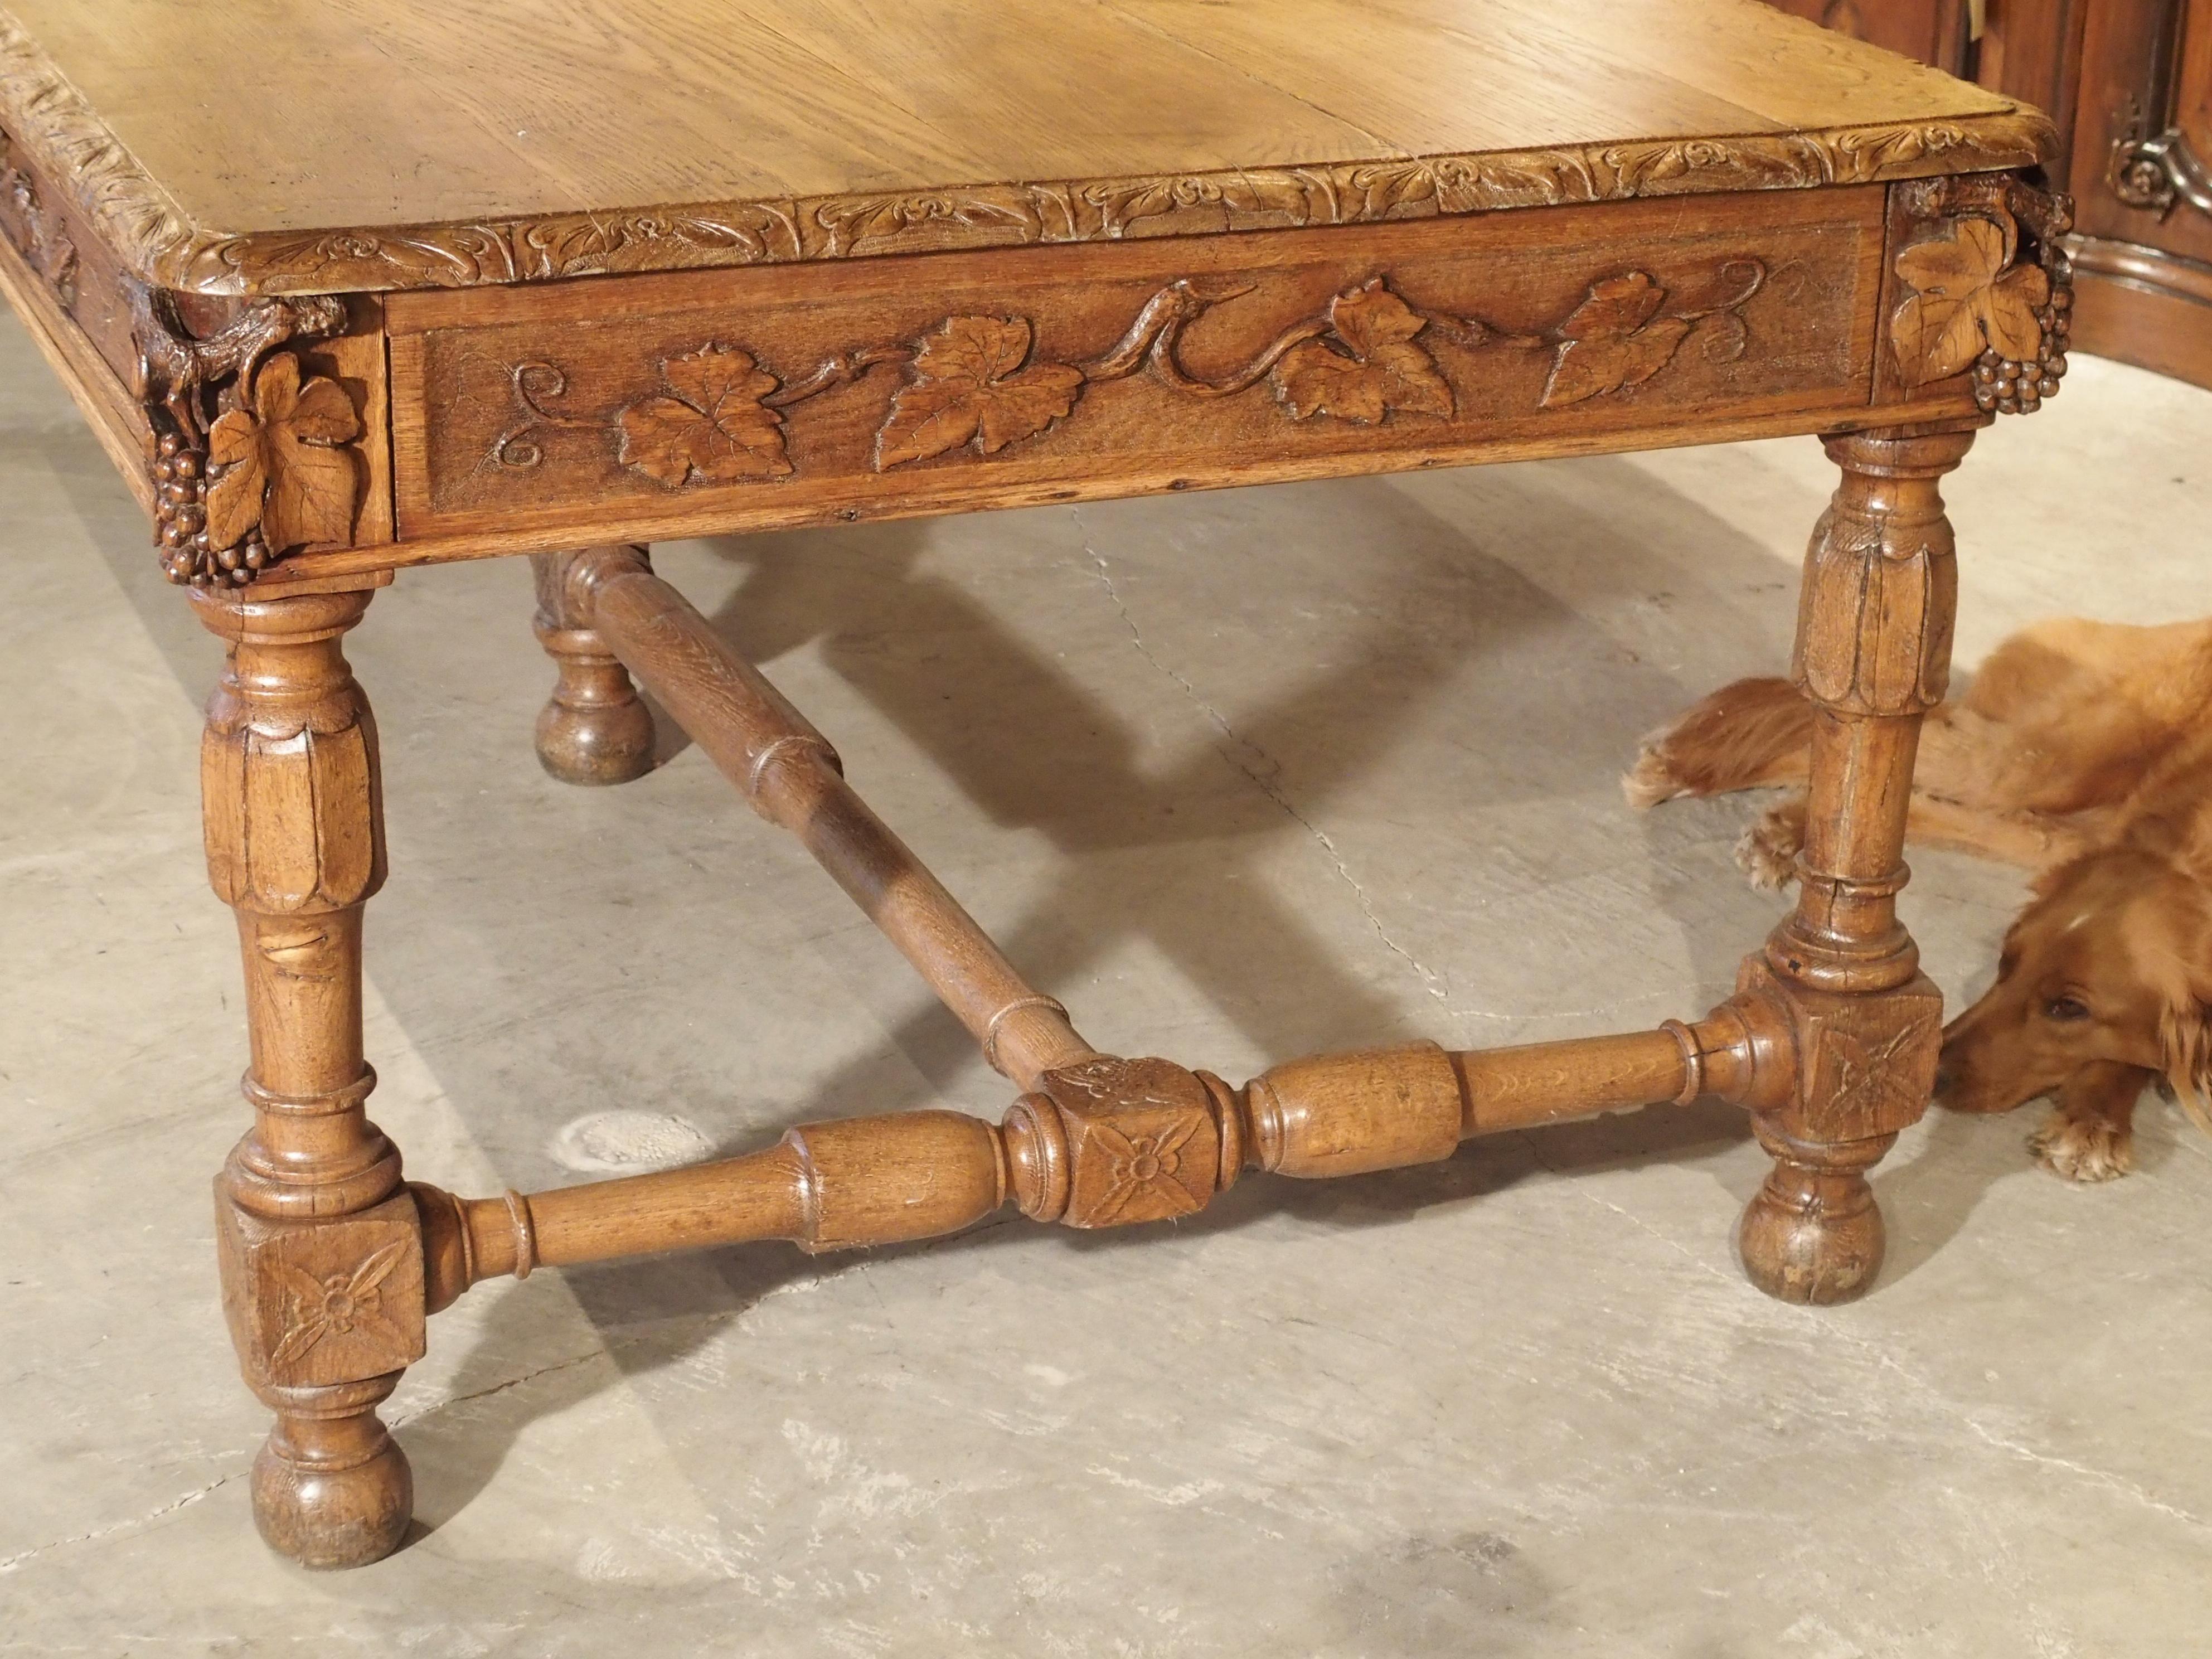 This versatile antique French table with its hand carved grape motifs can be used as a dining room table, library table, a centre table, hall table or, as a large desk. It was originally made as a tasting or presentation table in a French country